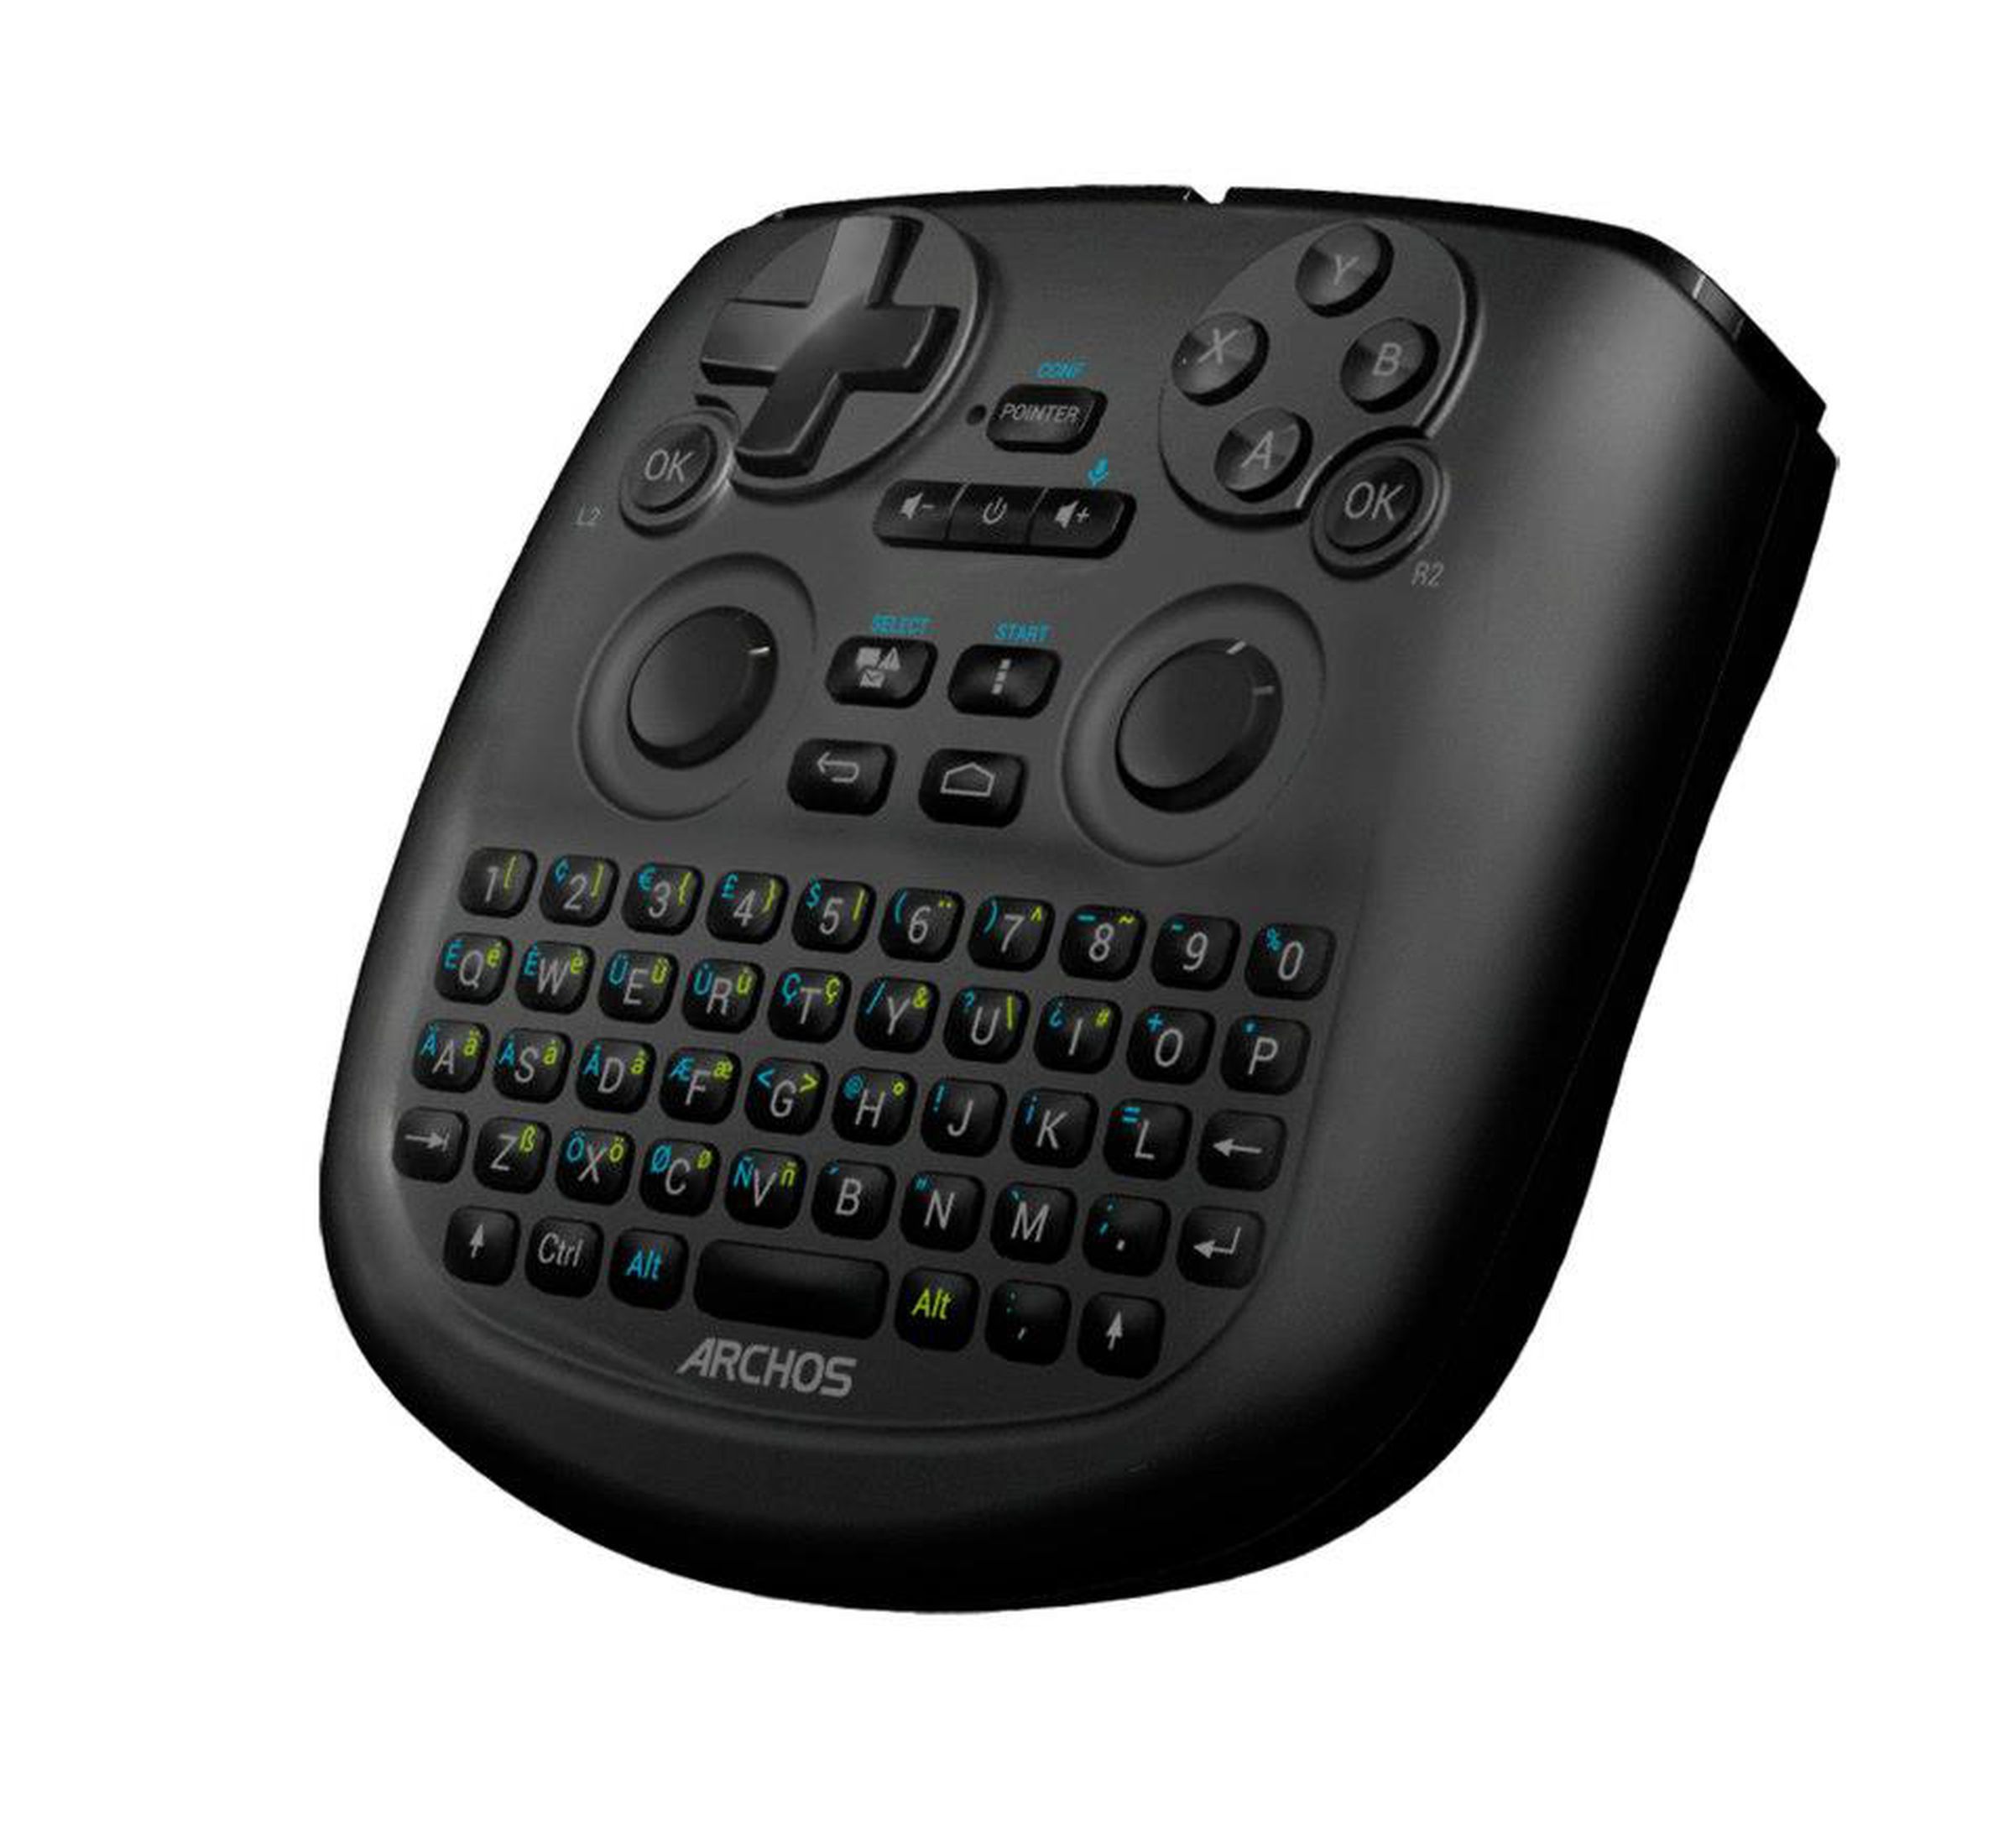 Archos TV Connect streamer press pictures